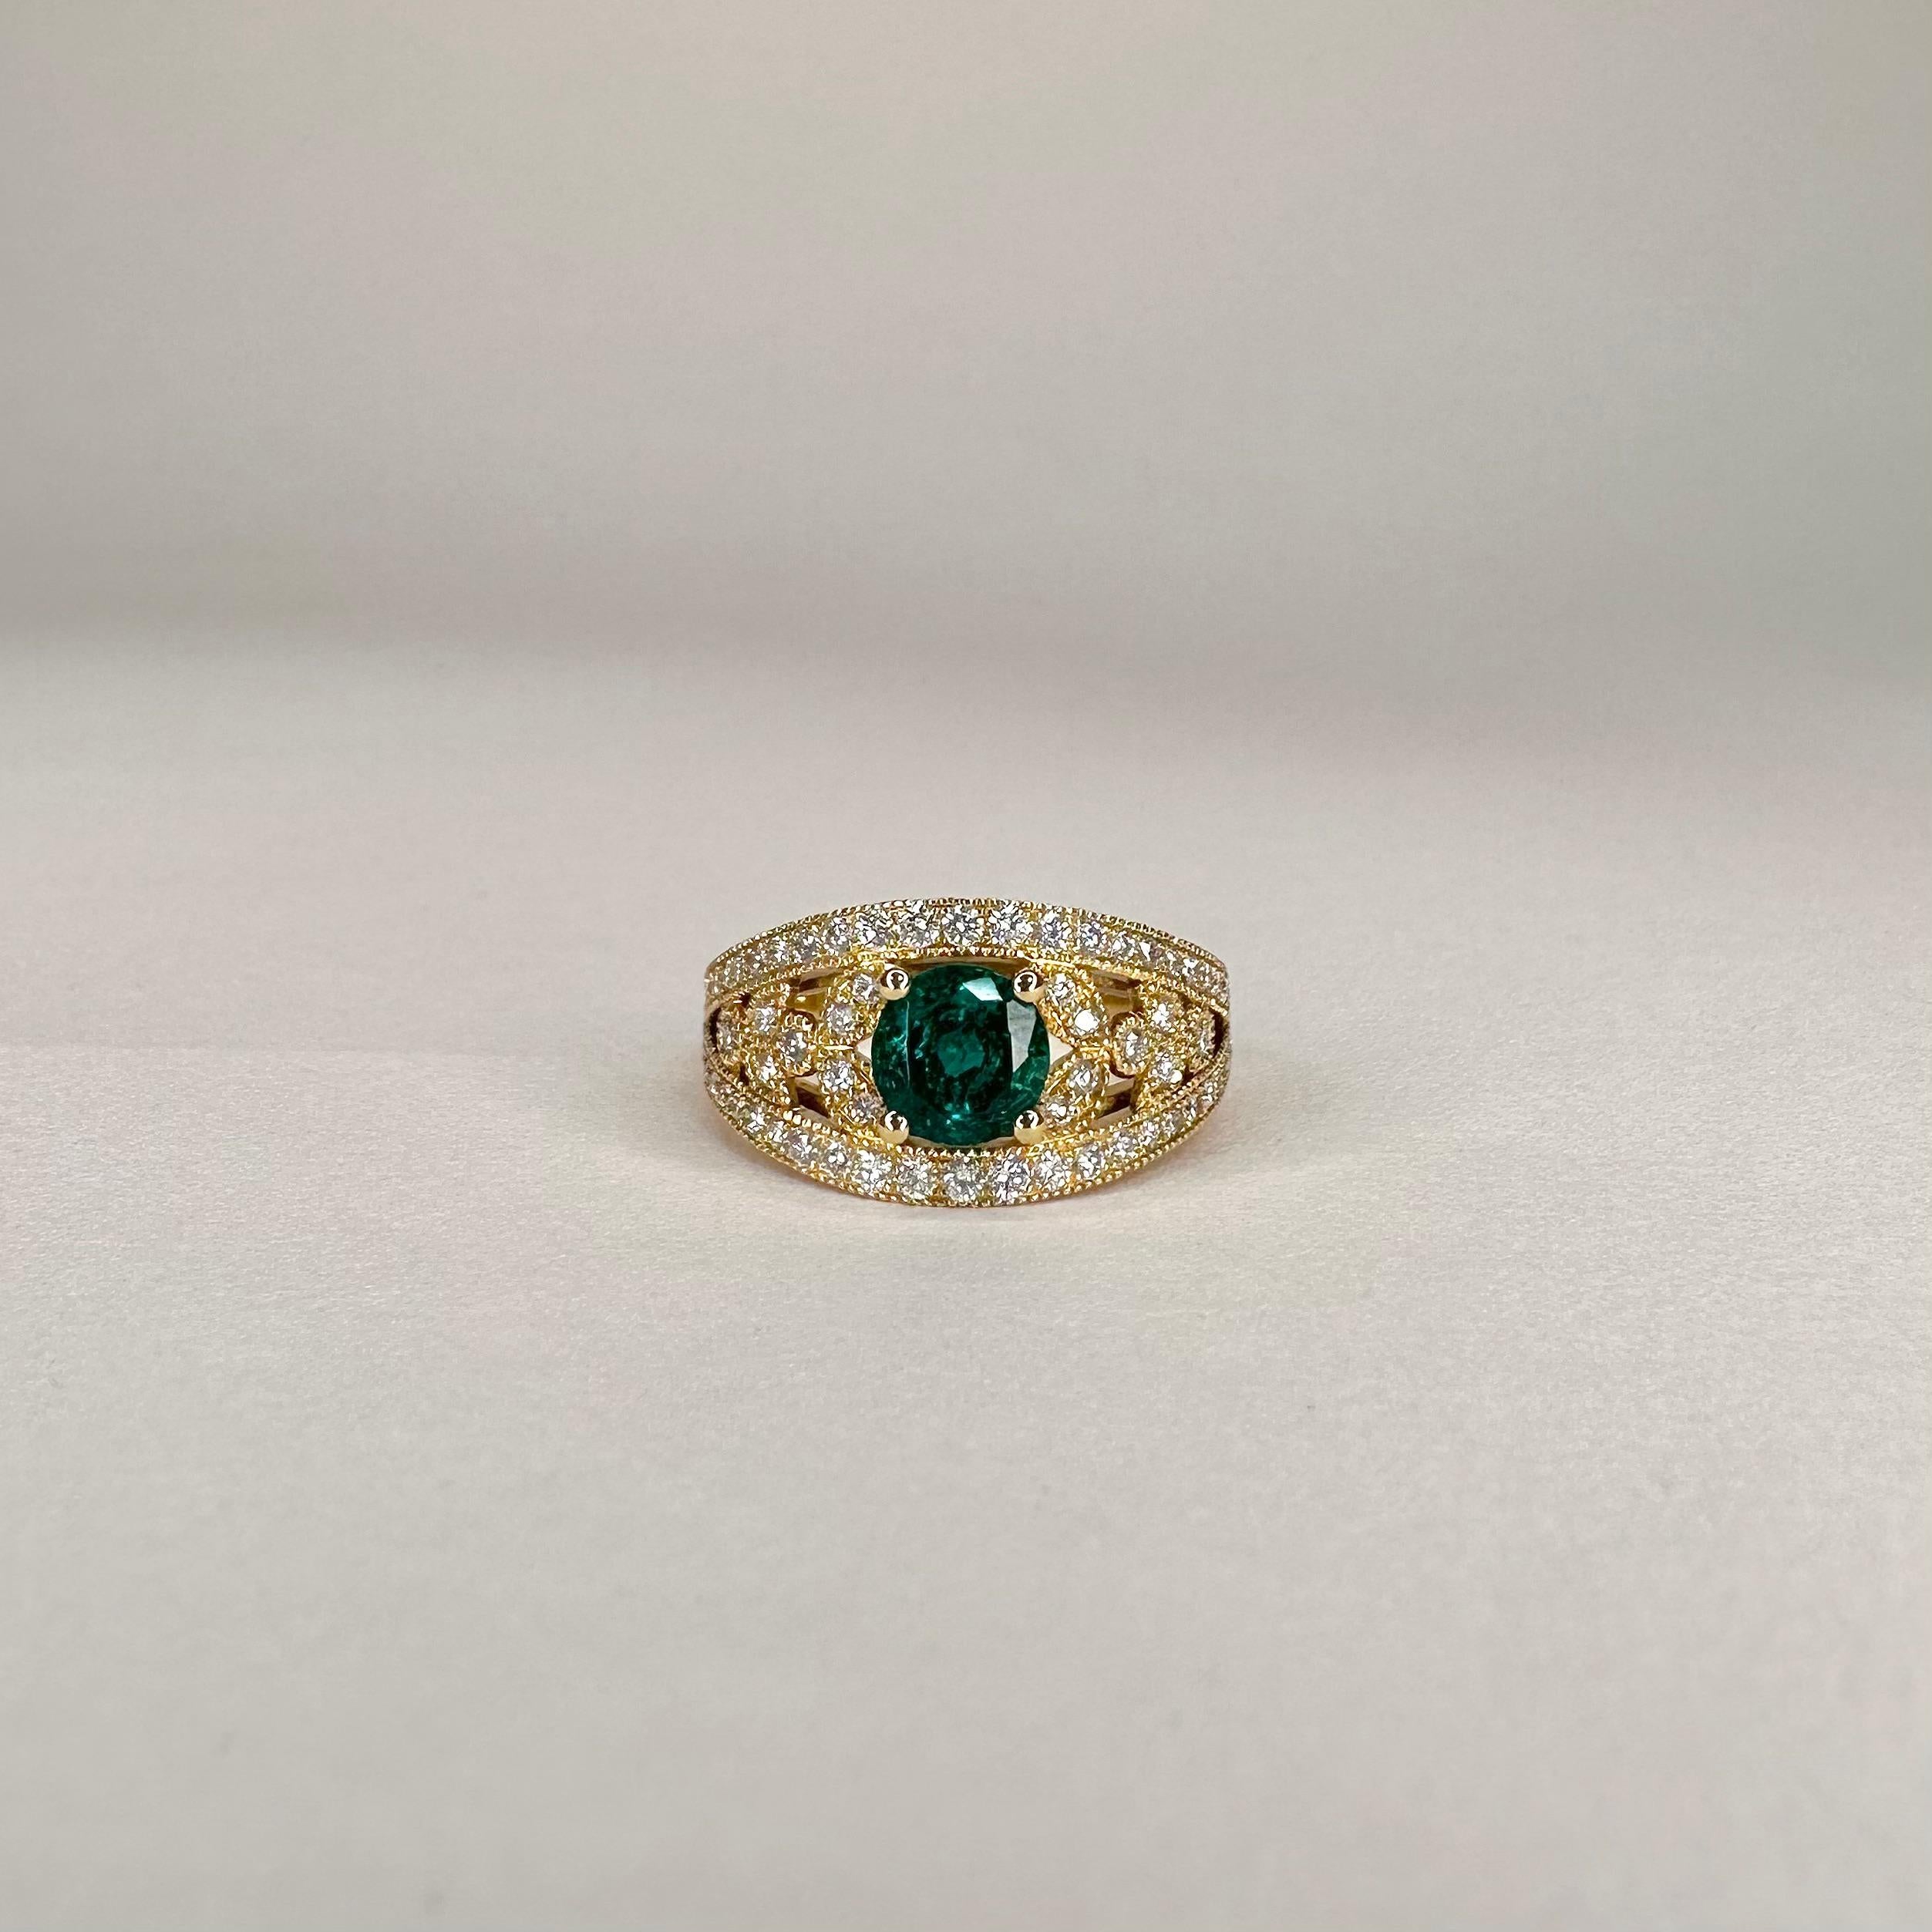 For Sale:  18k Yellow Gold Laurel Leaf Design 0.85 Ct Vivid Green Emerald Ring with Diamond 3